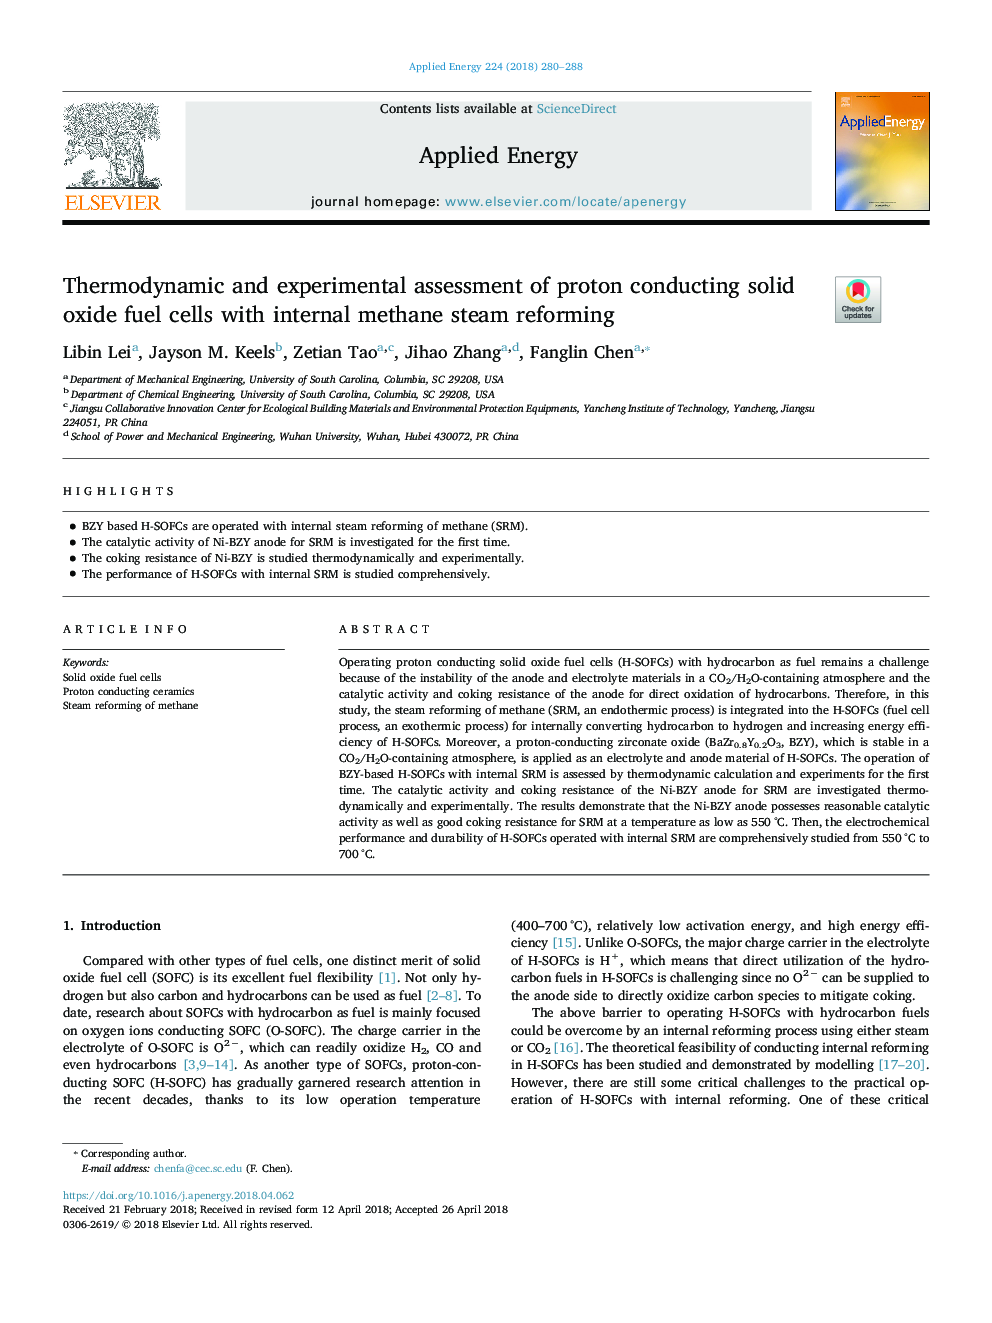 Thermodynamic and experimental assessment of proton conducting solid oxide fuel cells with internal methane steam reforming